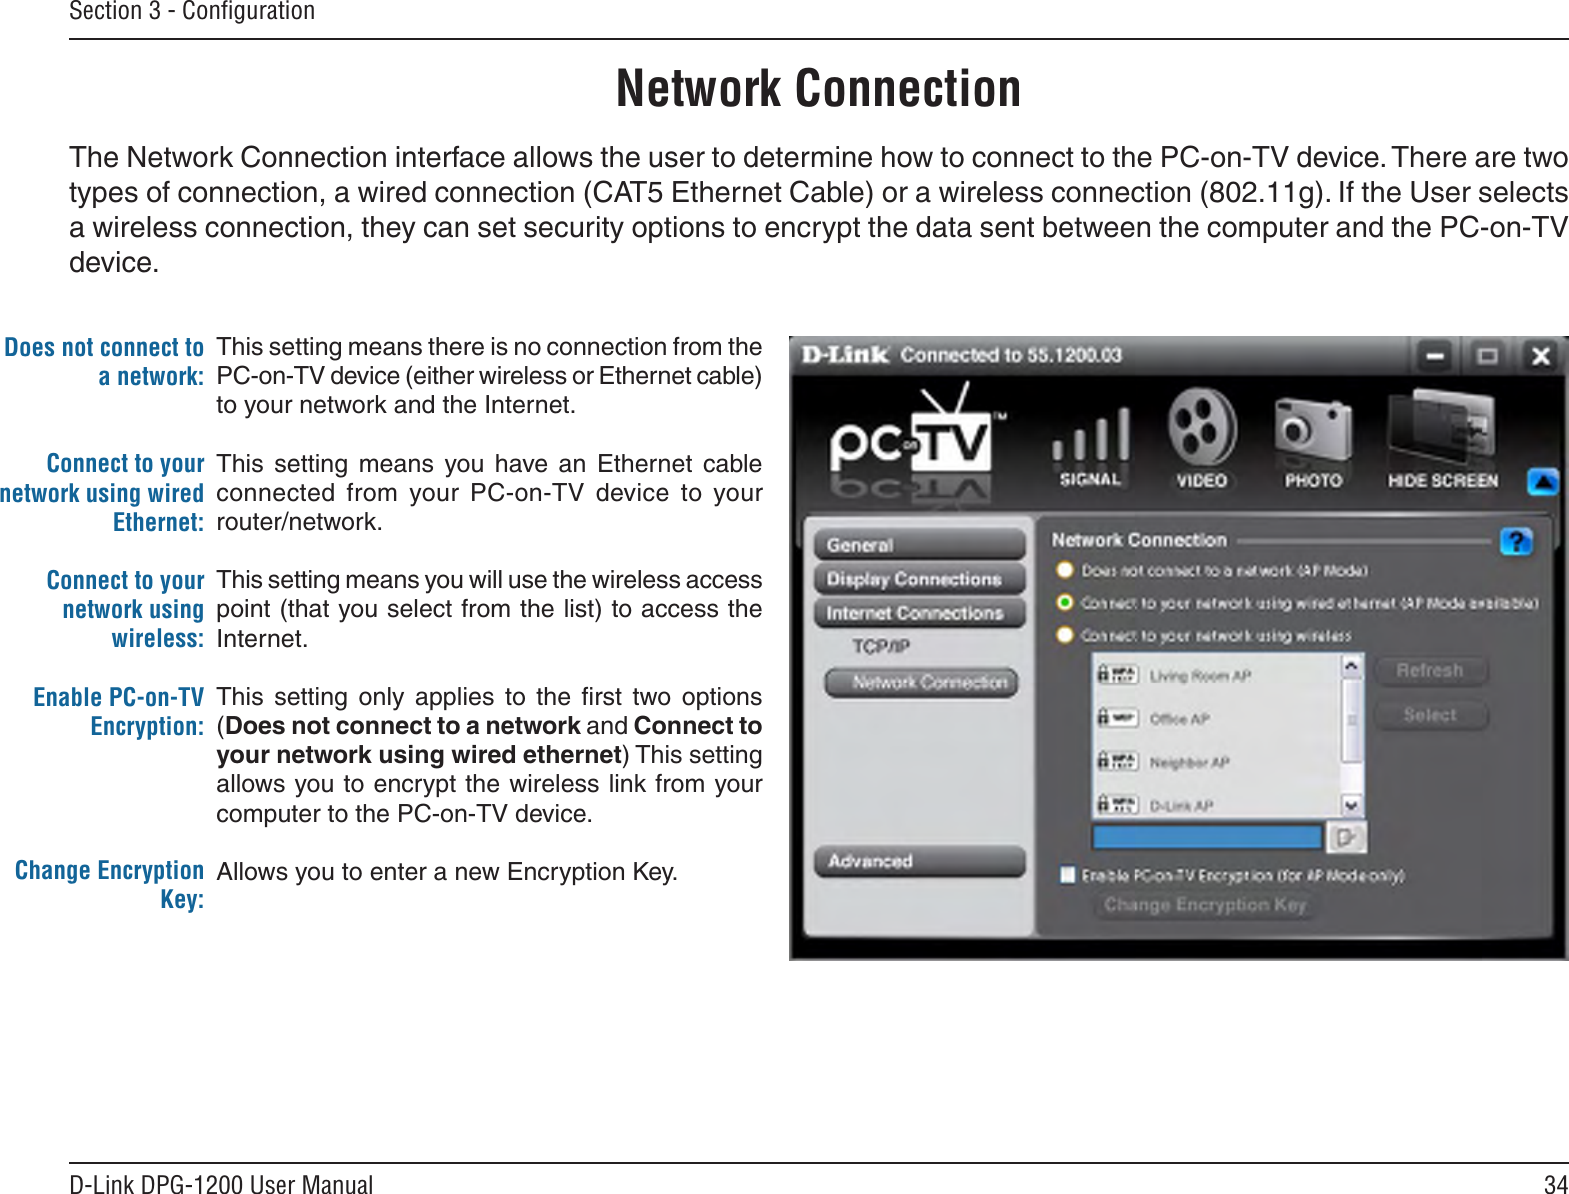 34D-Link DPG-1200 User ManualSection 3 - ConﬁgurationDoes not connect to a network:Connect to your network using wired Ethernet:Connect to your network using wireless:Enable PC-on-TV Encryption:Change Encryption Key:This setting means there is no connection from the PC-on-TV device (either wireless or Ethernet cable) to your network and the Internet.This  setting  means  you  have  an  Ethernet  cable connected  from  your  PC-on-TV  device  to  your router/network.This setting means you will use the wireless access point (that you select from the list) to access the Internet.This  setting  only  applies  to  the  ﬁrst  two  options (Does not connect to a network and Connect to your network using wired ethernet) This setting allows you to encrypt the wireless link from your computer to the PC-on-TV device.Allows you to enter a new Encryption Key.Network ConnectionThe Network Connection interface allows the user to determine how to connect to the PC-on-TV device. There are two types of connection, a wired connection (CAT5 Ethernet Cable) or a wireless connection (802.11g). If the User selects a wireless connection, they can set security options to encrypt the data sent between the computer and the PC-on-TV device.